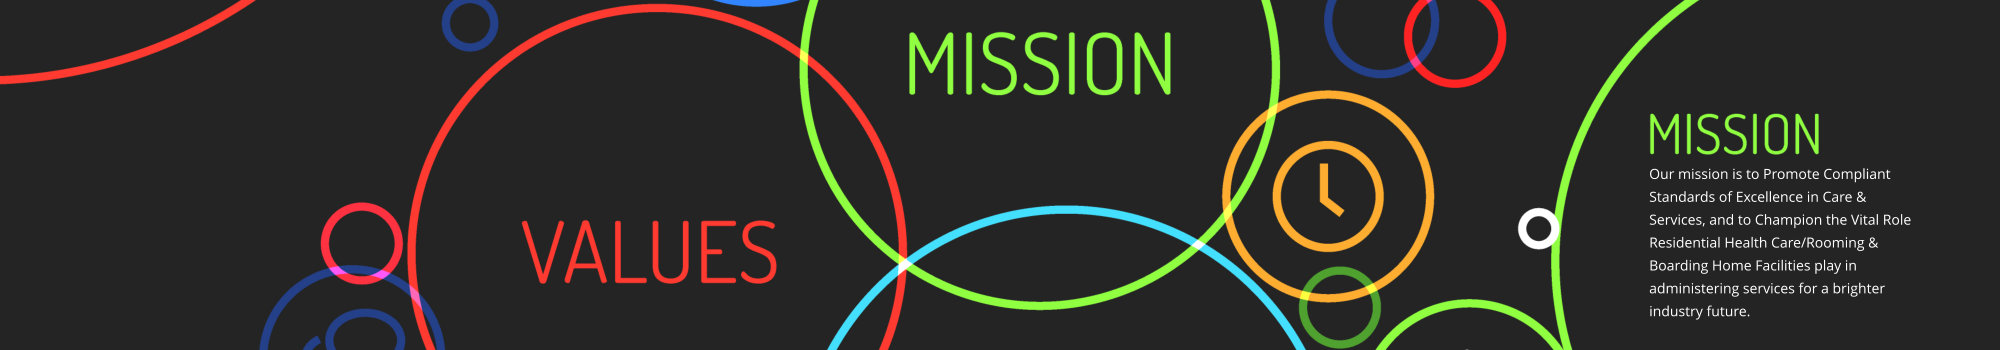 mission and values